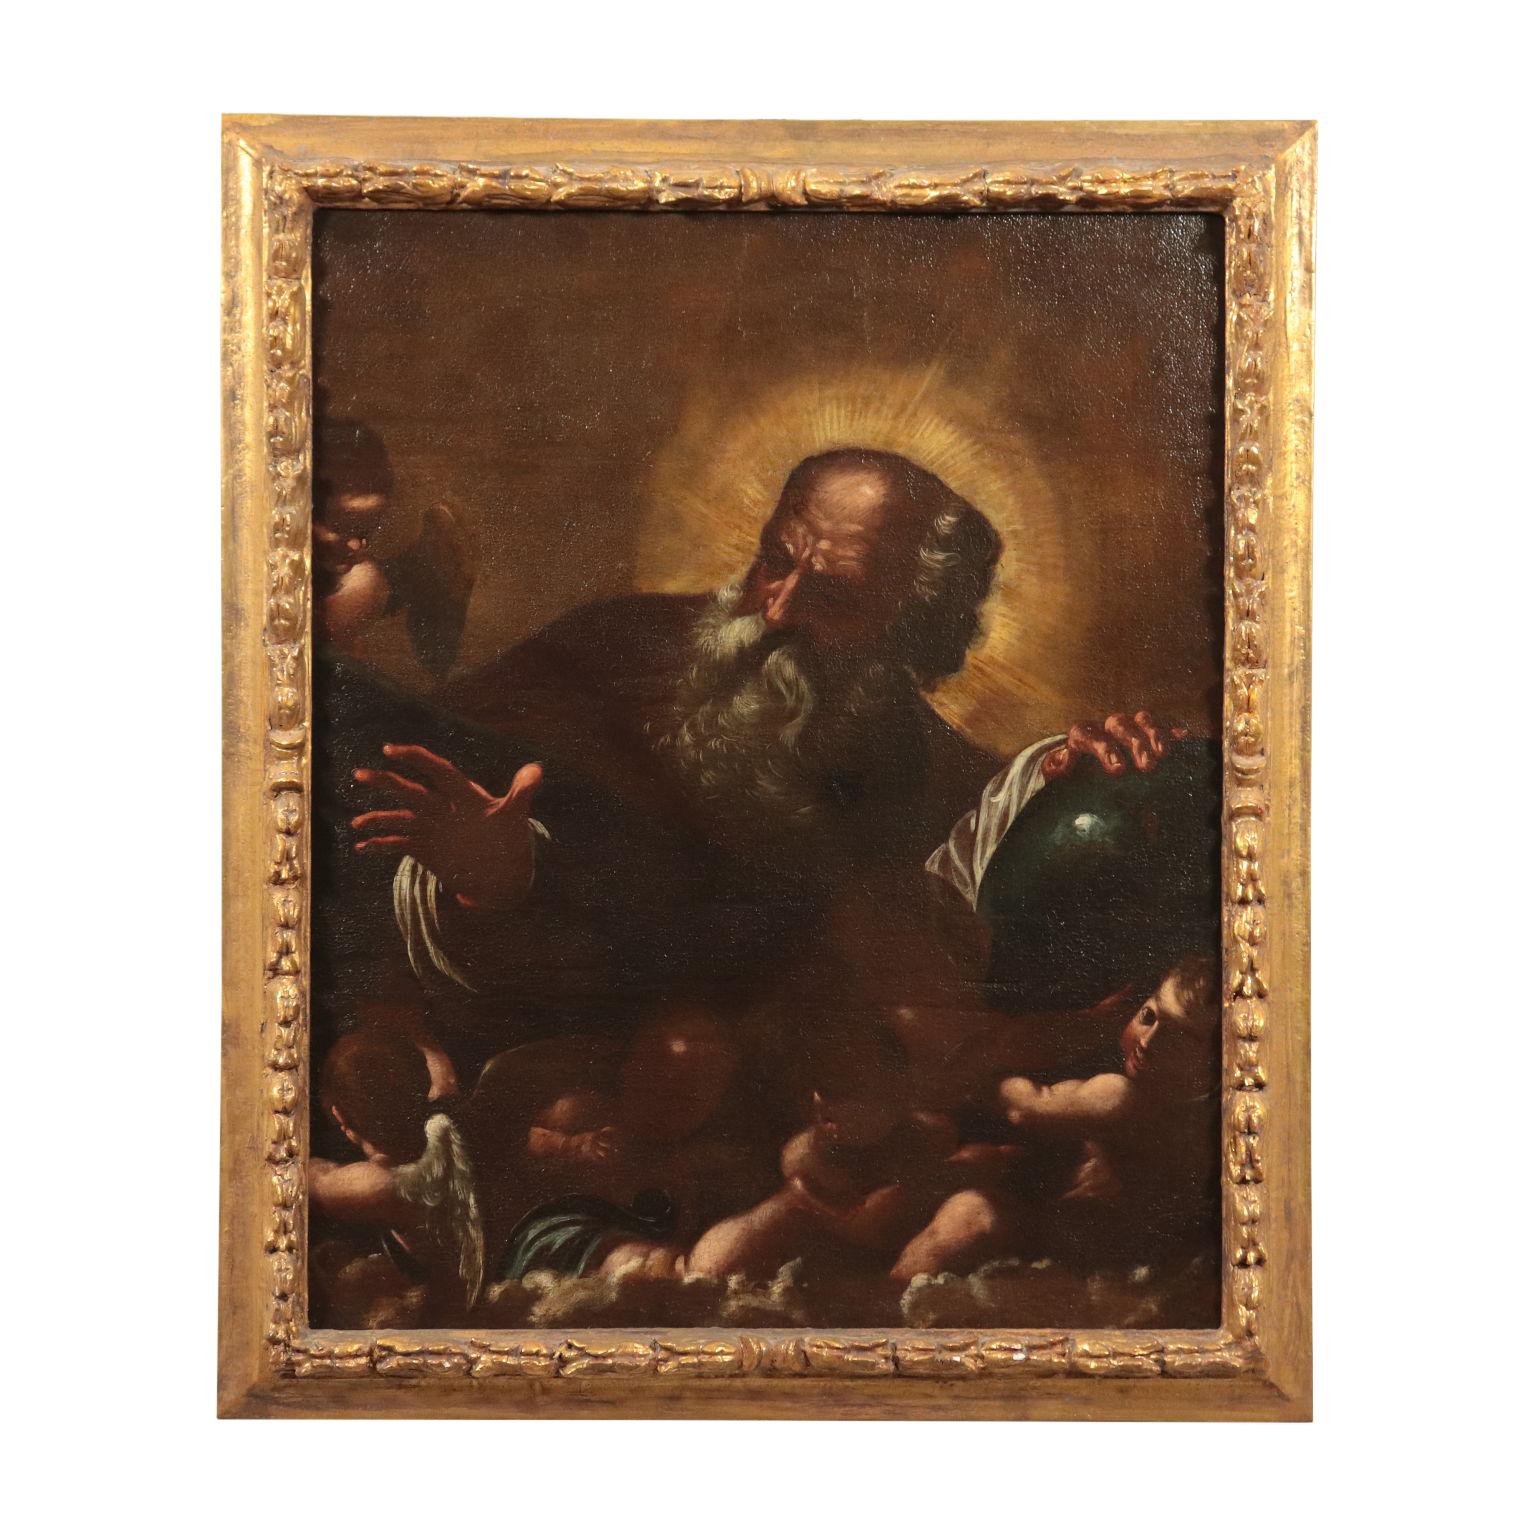 Ferrau Fenzoni Figurative Painting - God Father and Angels, Attributed to Ferraù Fenzoni, Oil on Canvas, 17th Century